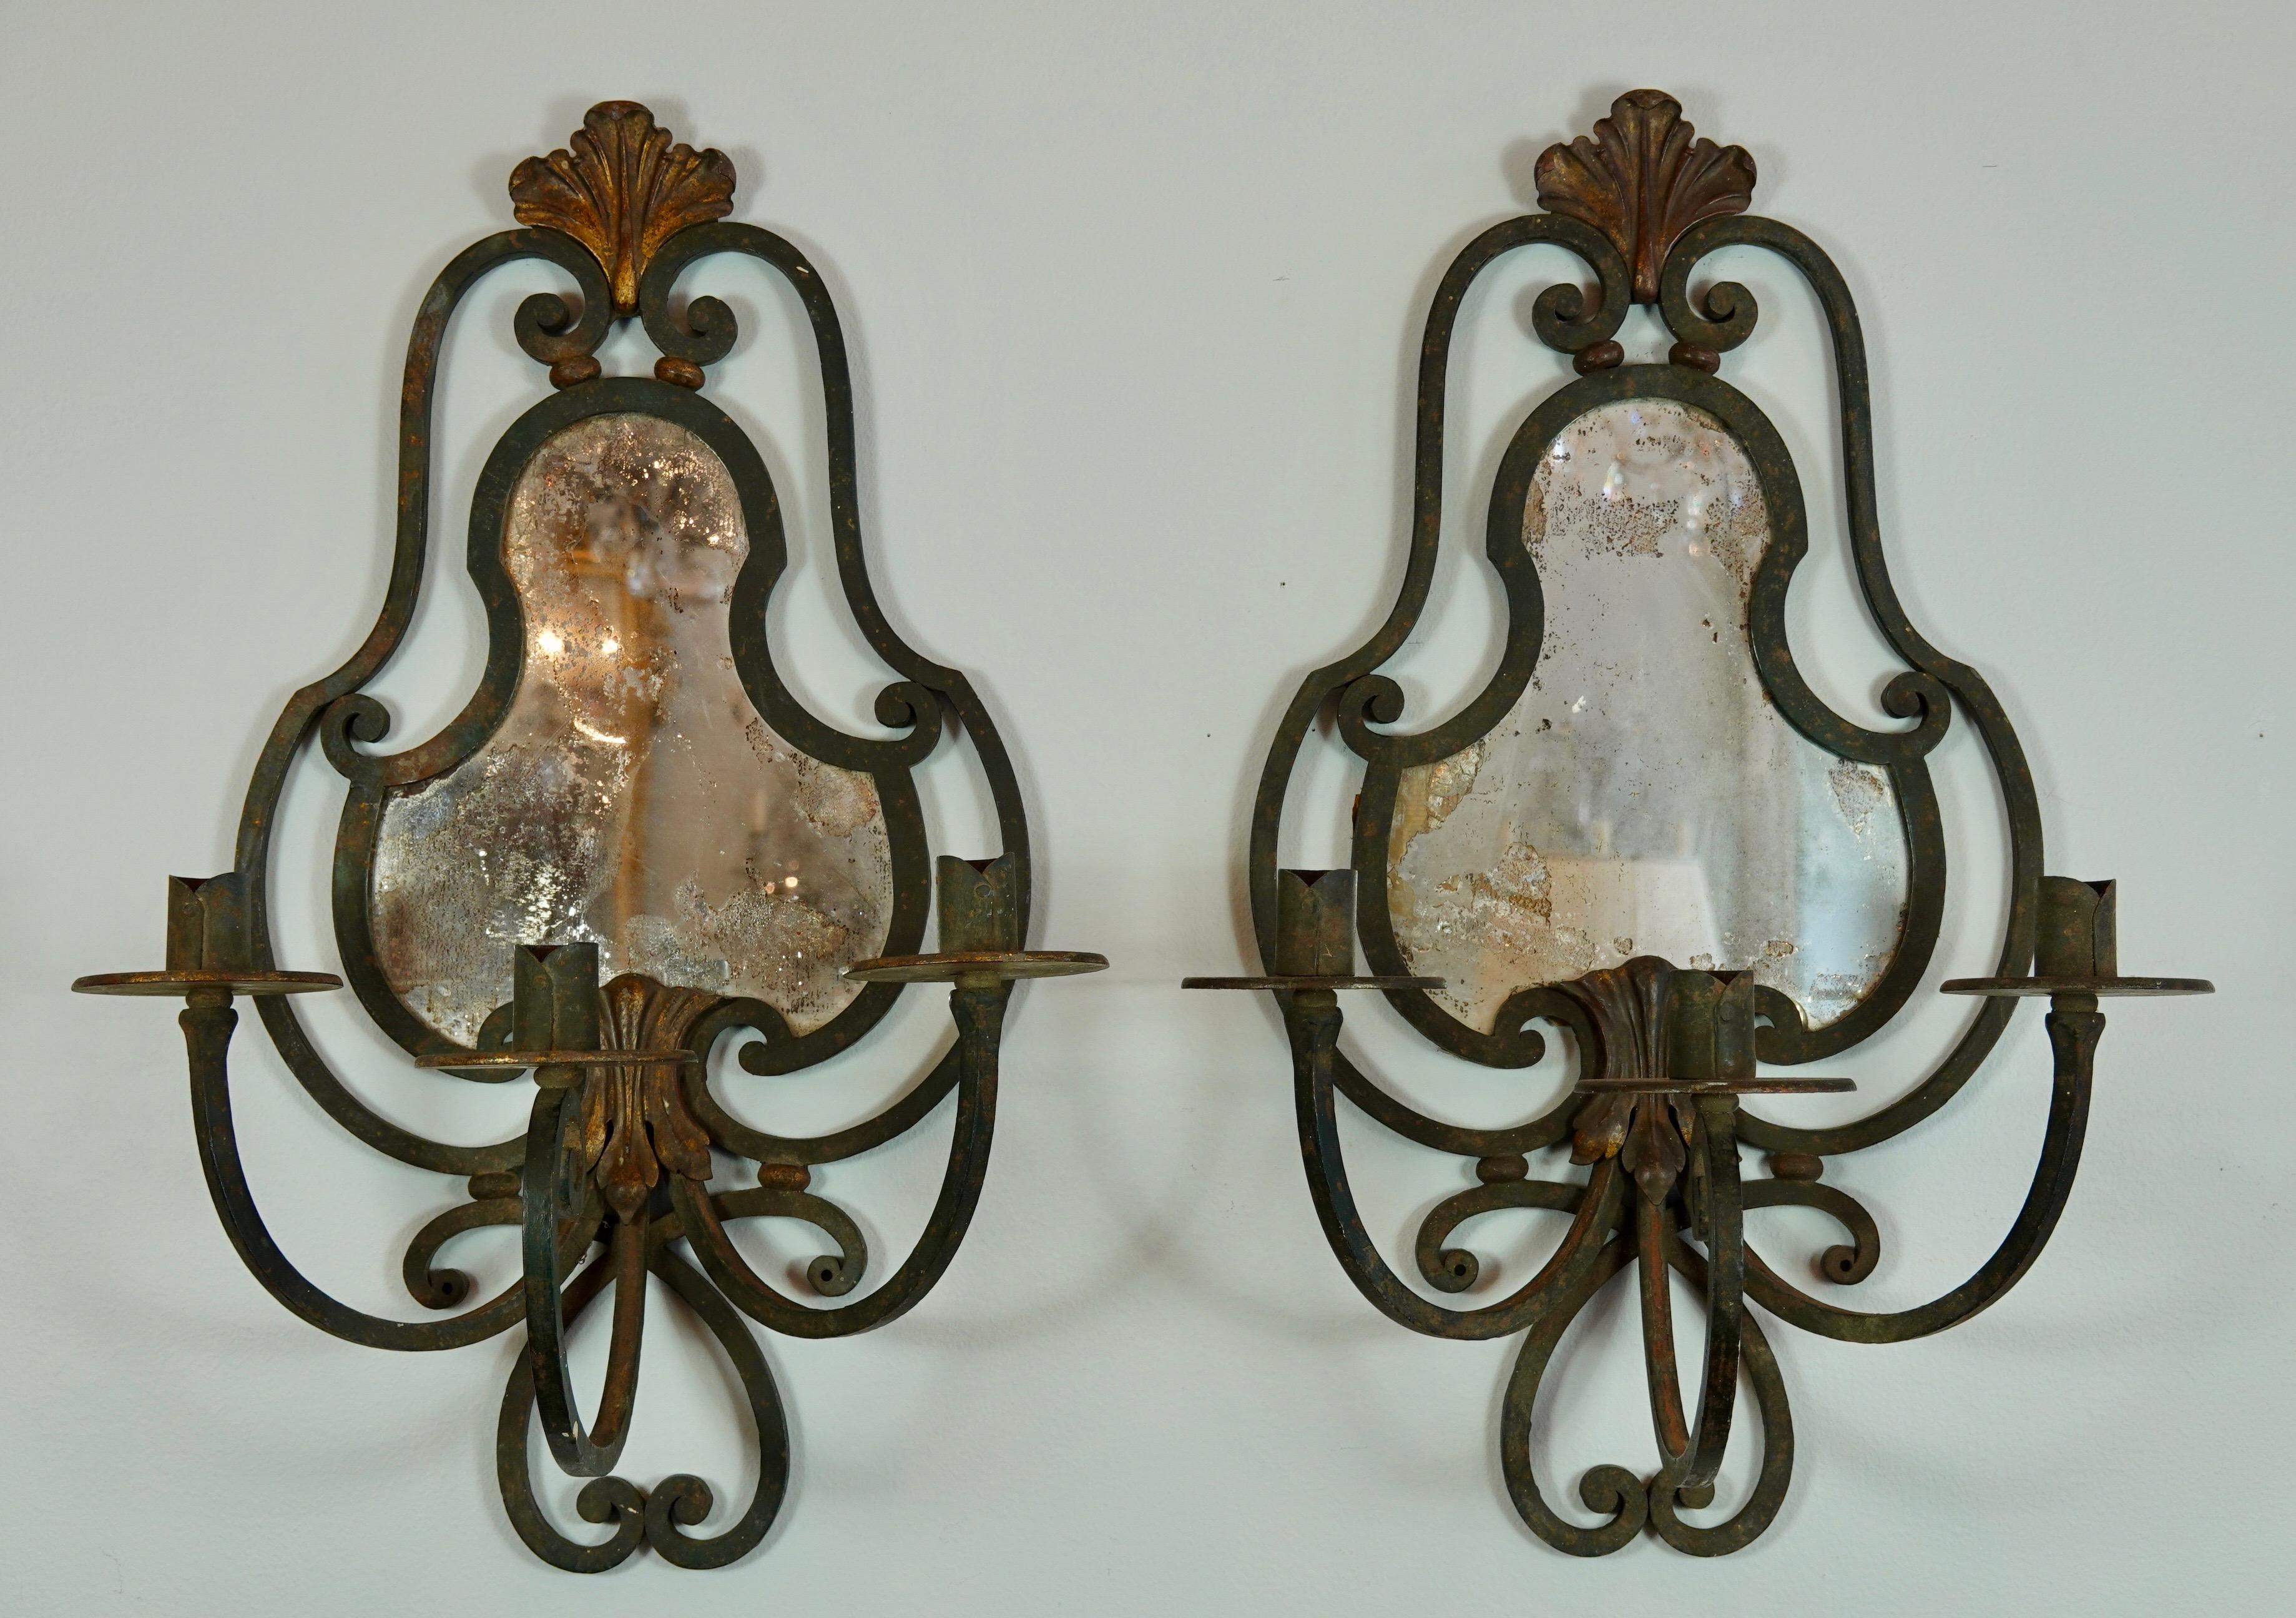 Large and impressive pair of French provincial wrought iron sconces with three arms and mirrored backs, (late 19th-early 20th century). Gilded tole acanthus leaf details. Two pairs are available. One pair (see photos), features old mercury glass